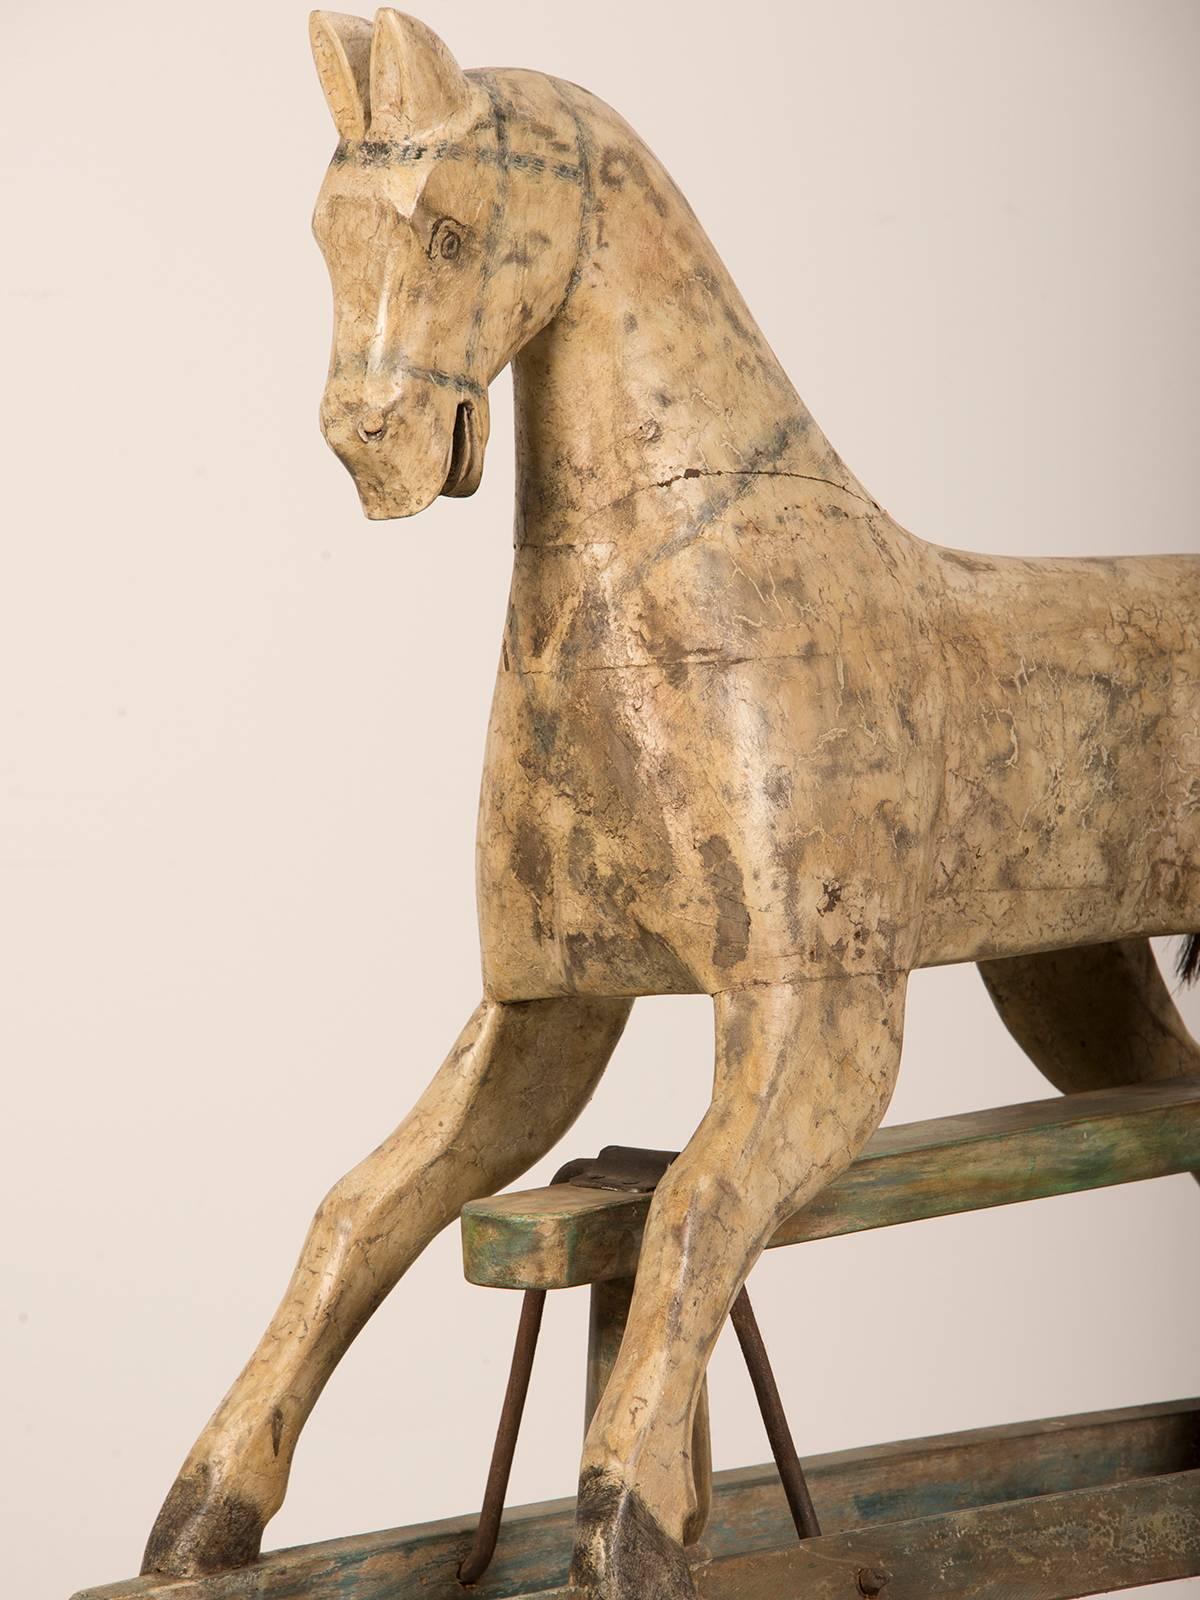 A painted wooden child's hobby horse with a dappled coat standing on a rocking stand found in France. The life like details and the original iron fittings that enable the horse to swing freely are wonderful aspects of this piece. The horse is